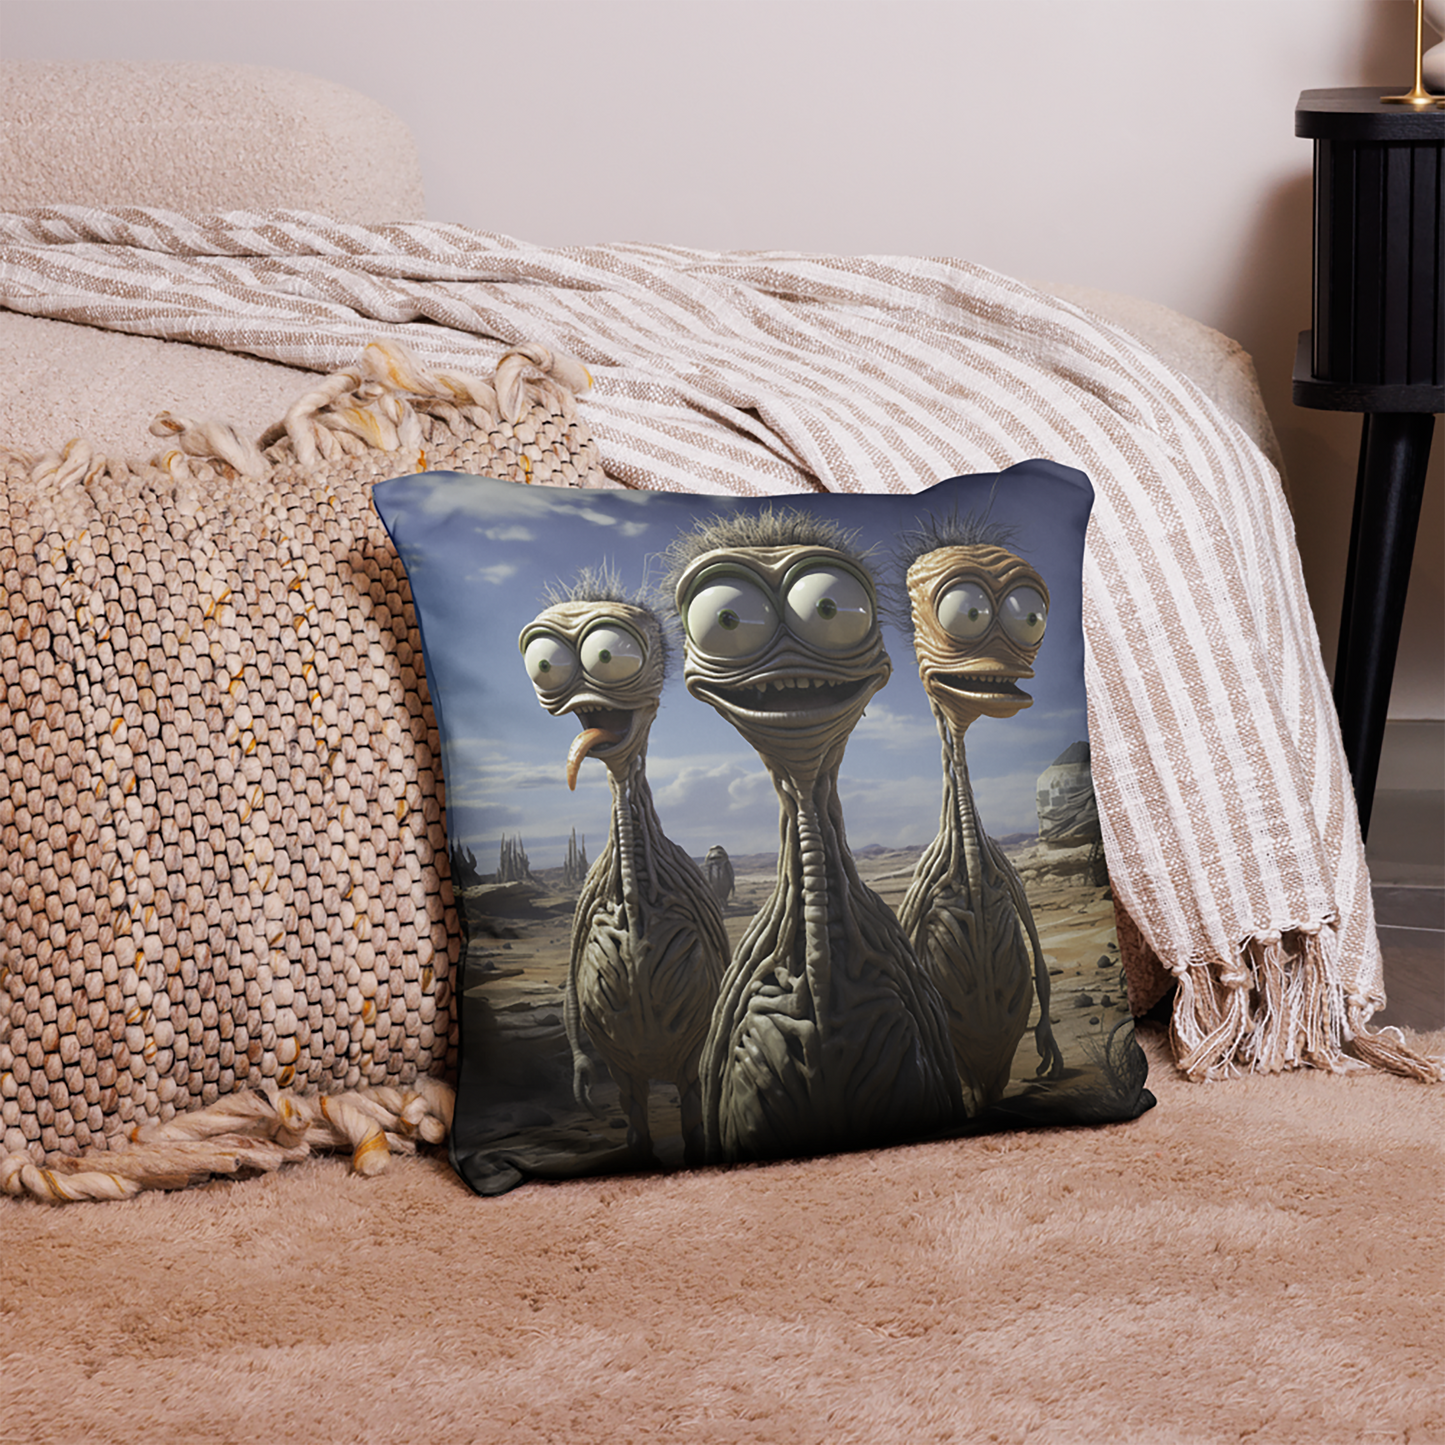 Space Throw Pillow Playful Caricature Alien Polyester Decorative Cushion 18x18